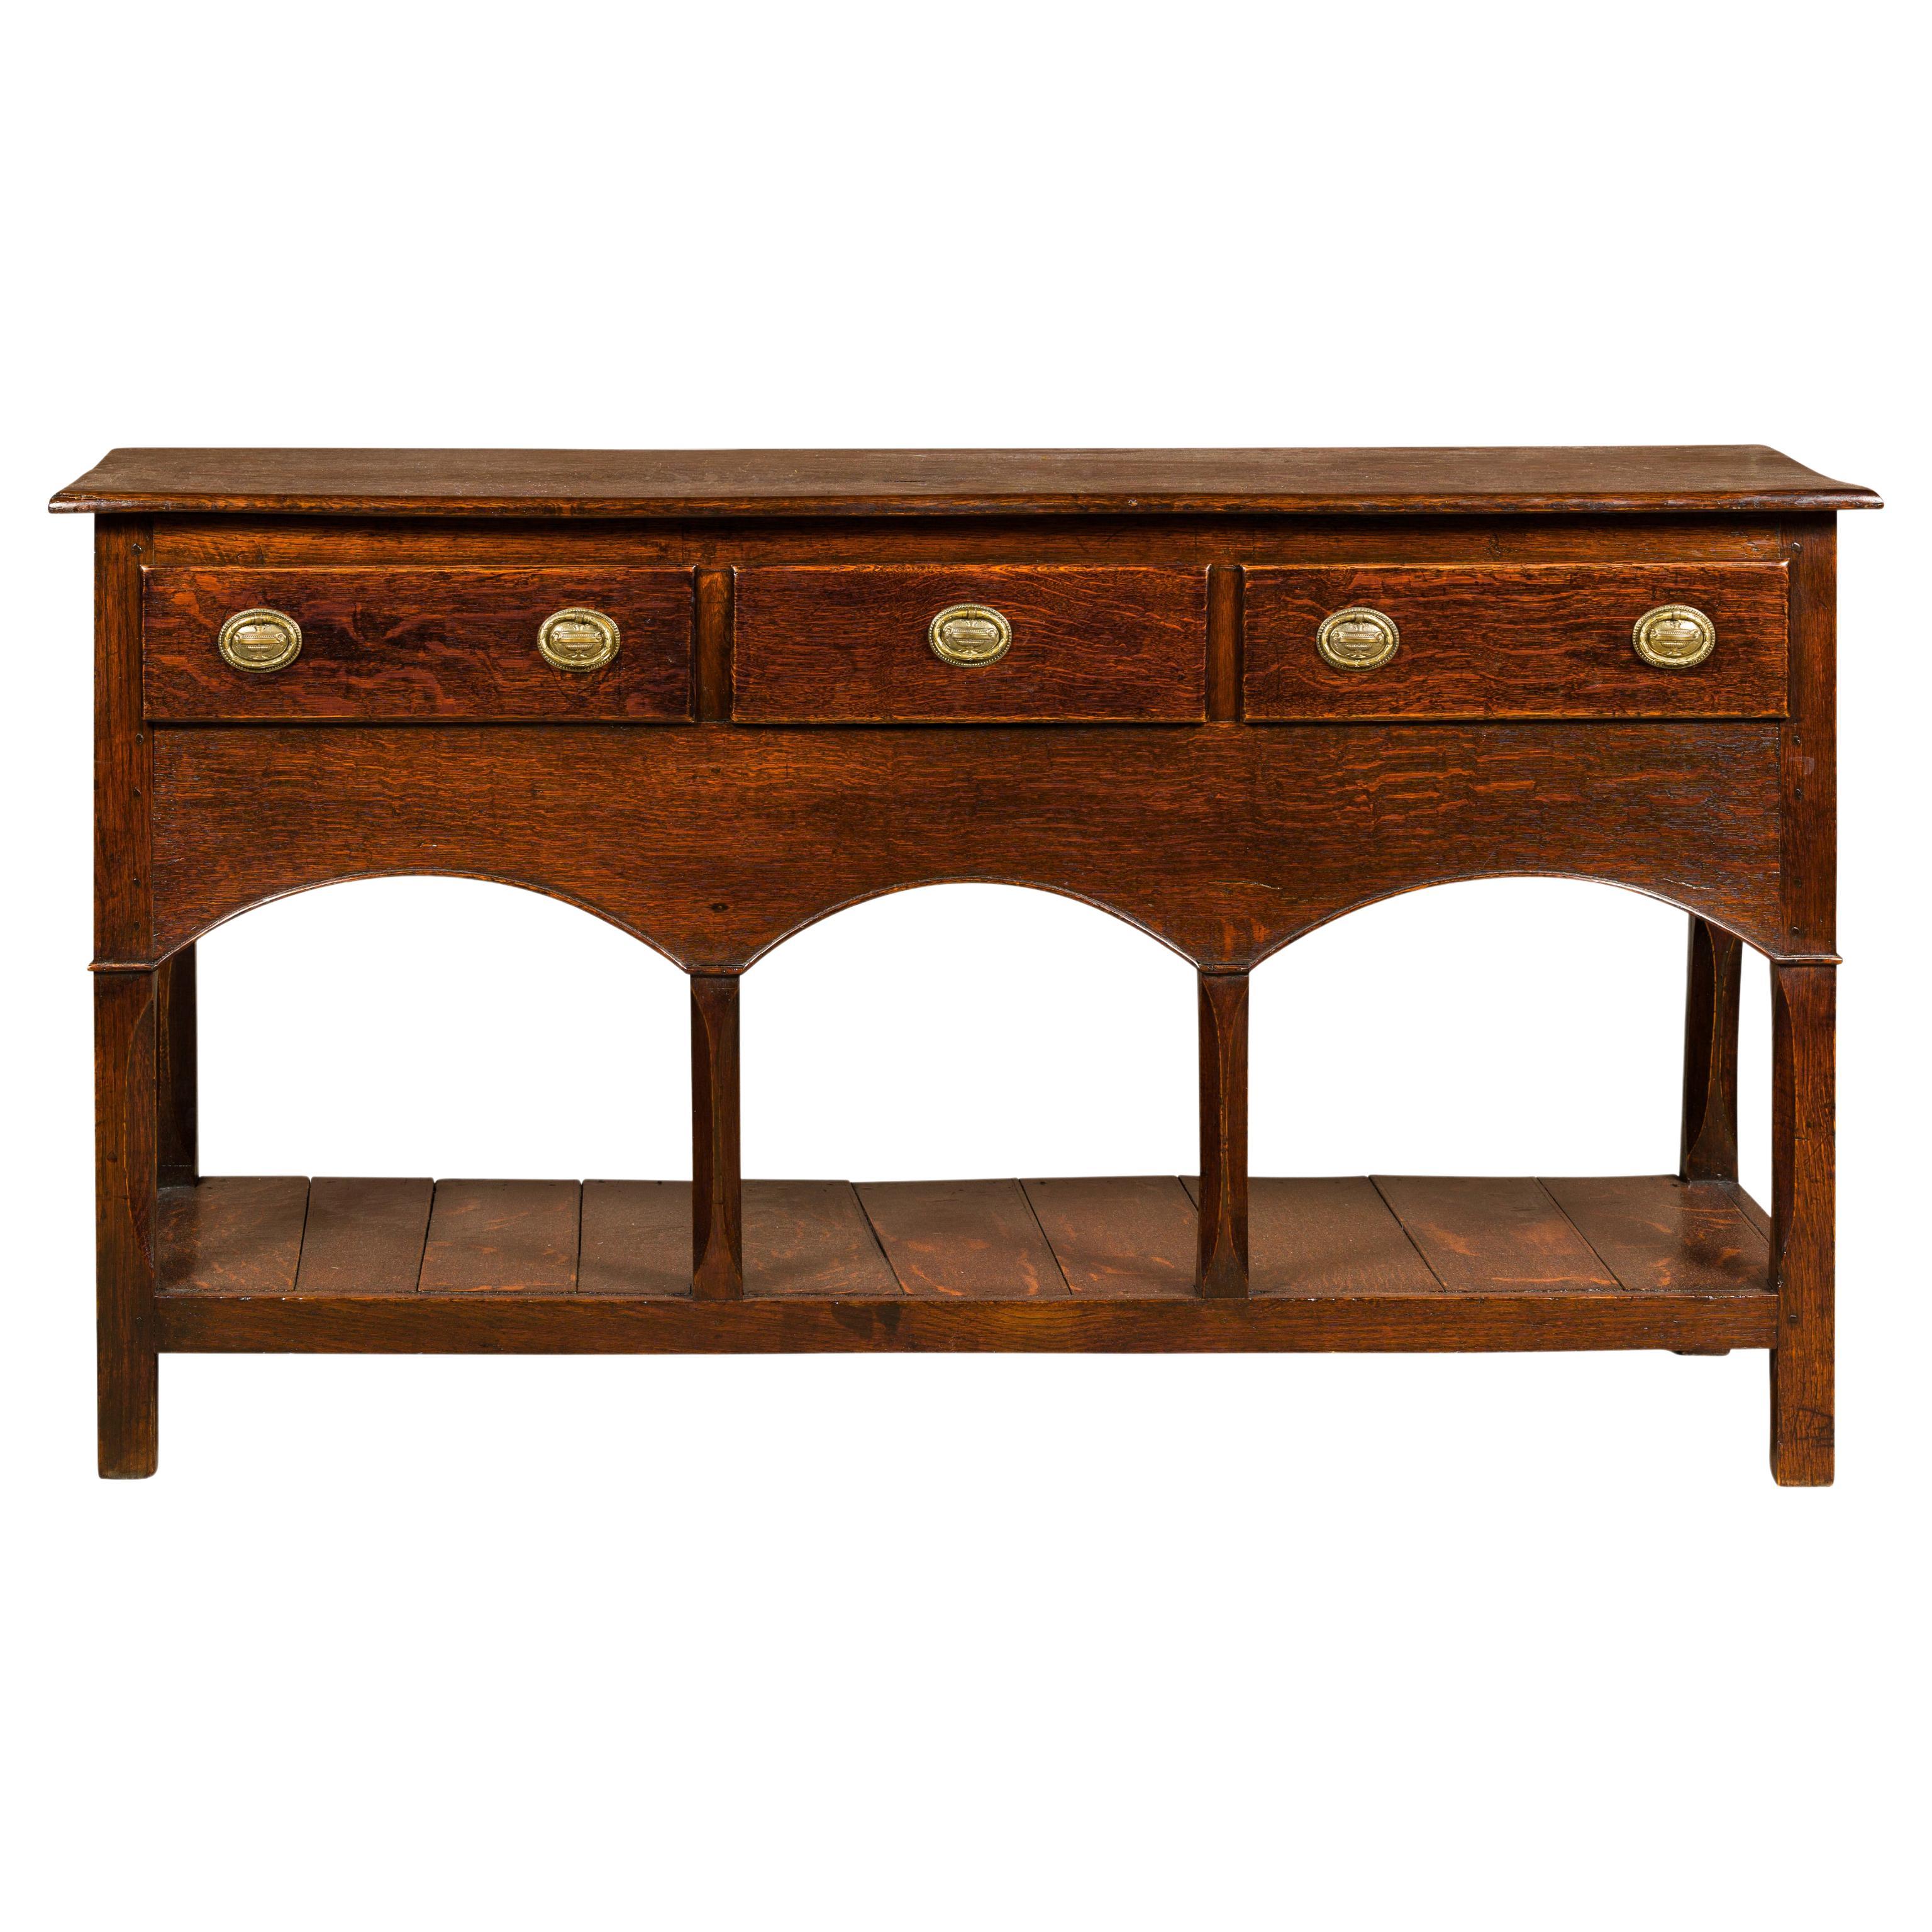 English George III 1800s Oak Dresser Base with Three Drawers and Arching Accents For Sale